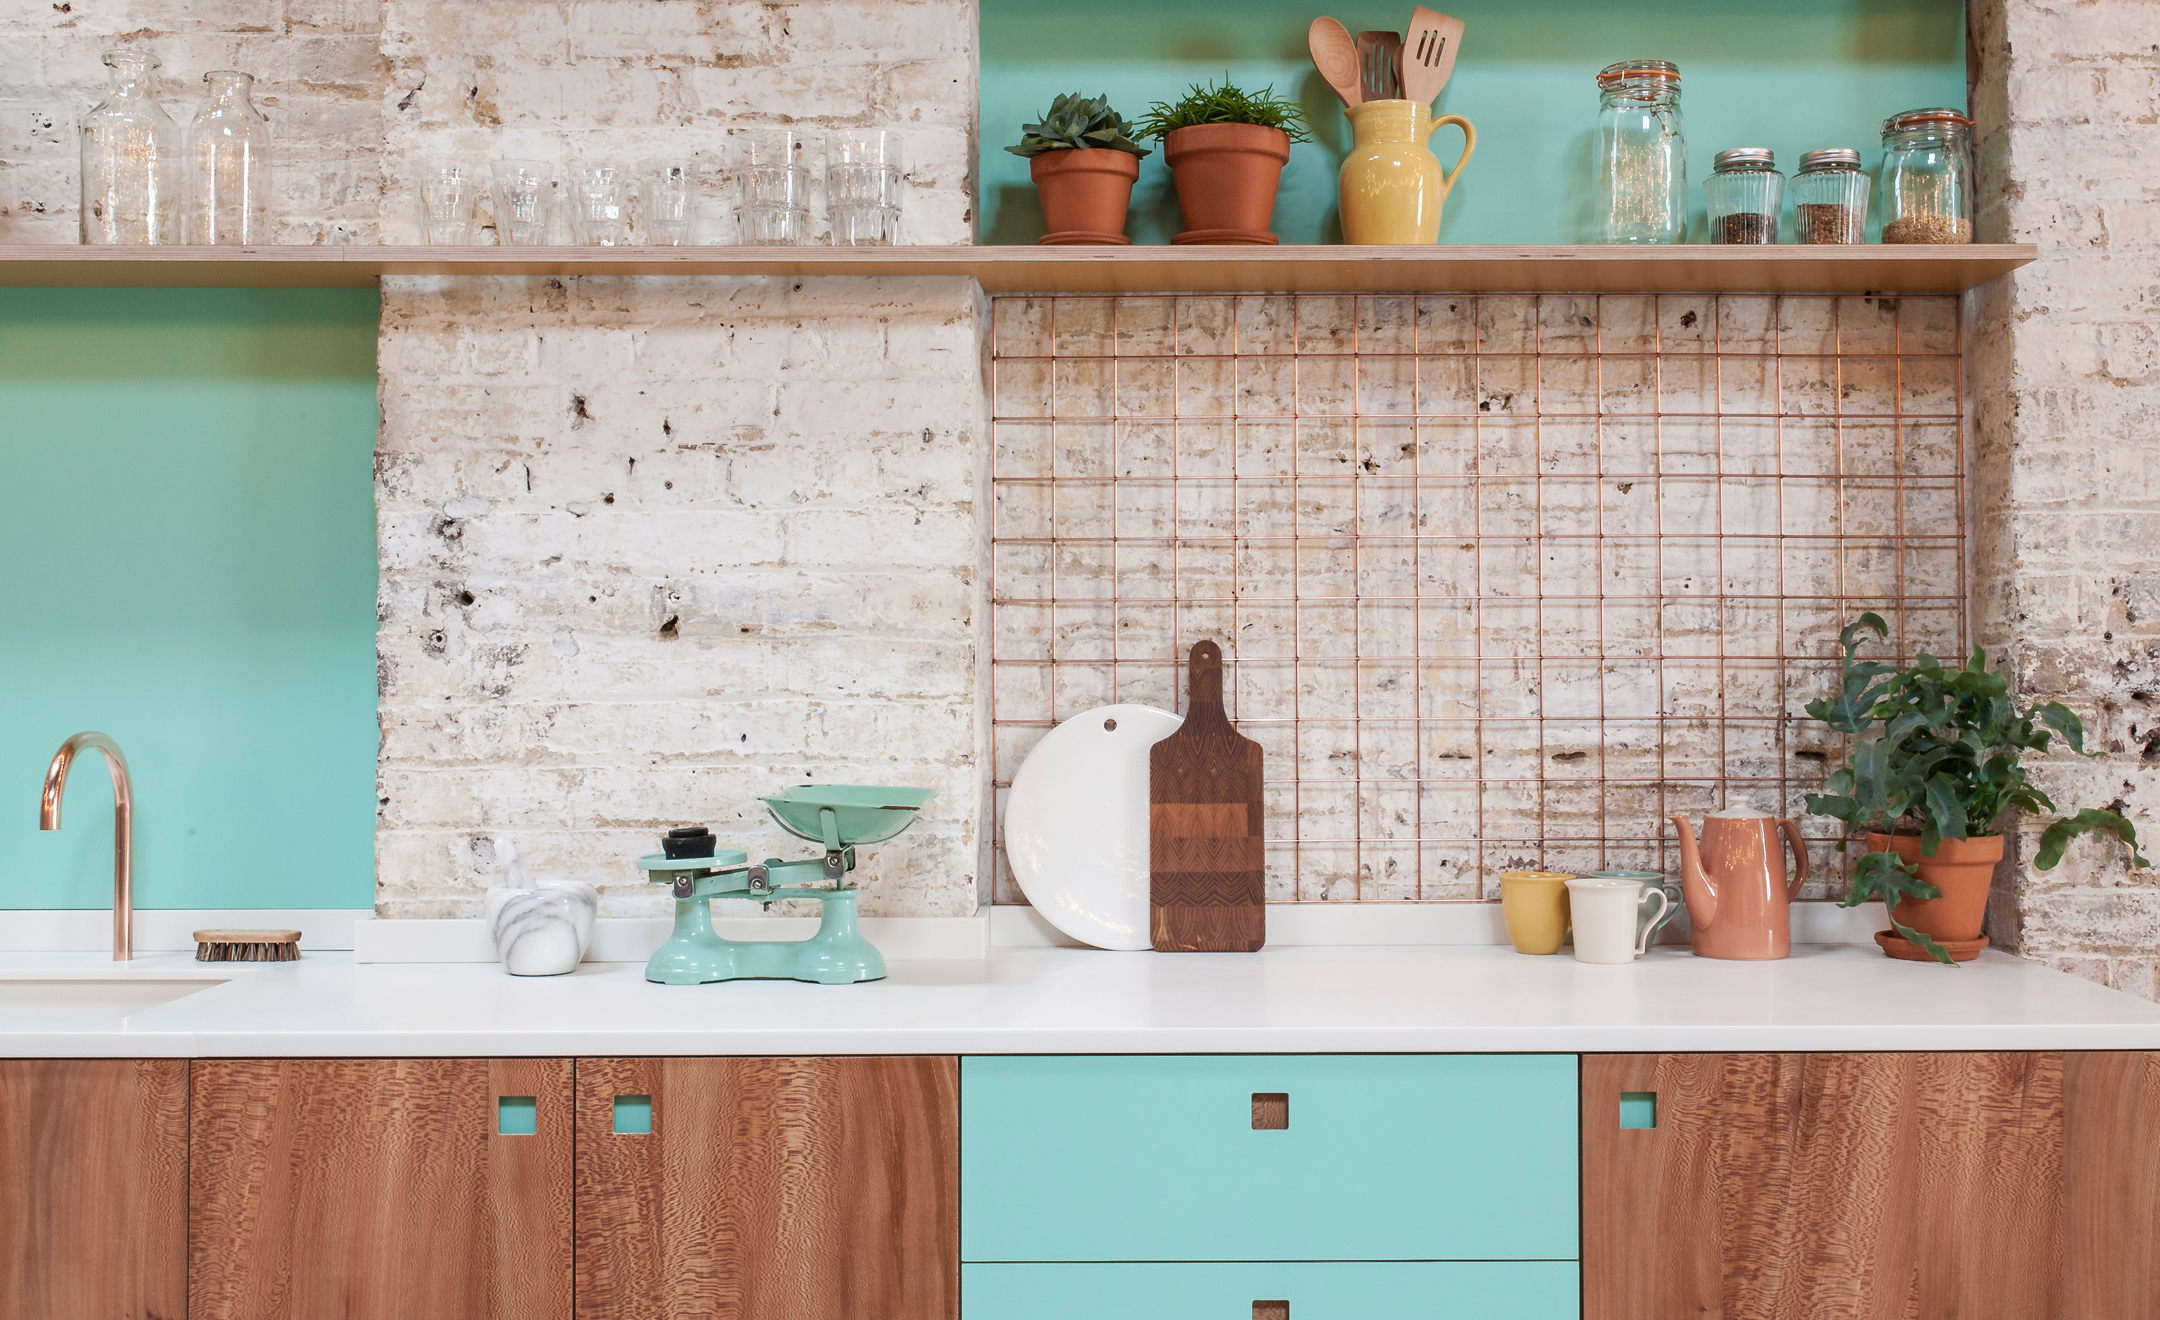 Kitchen Collection: all about aqua (& turquoise)